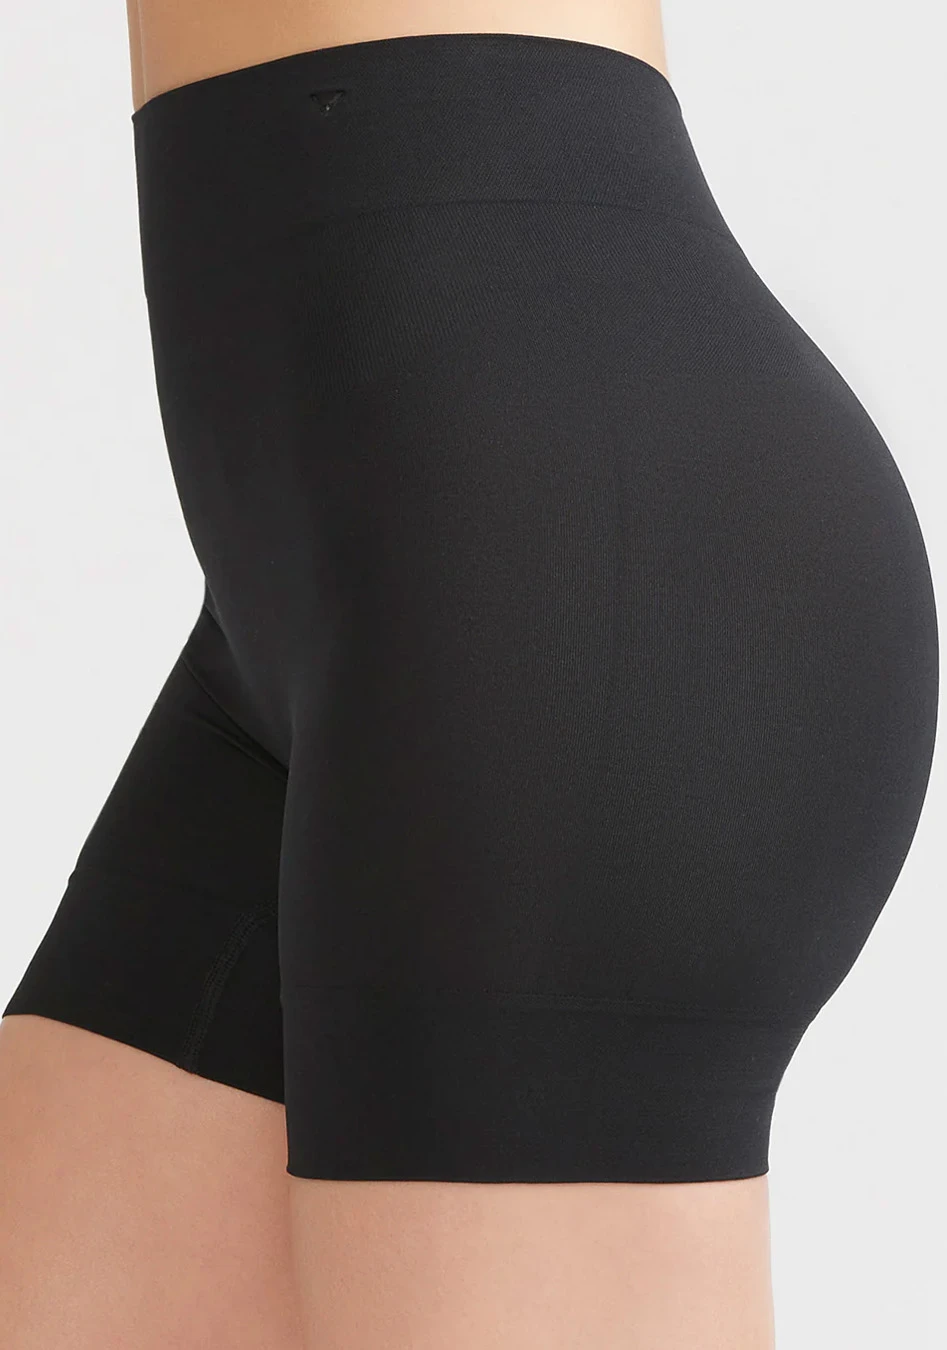 Yummie bria comfortably curved smoothing short seamless black